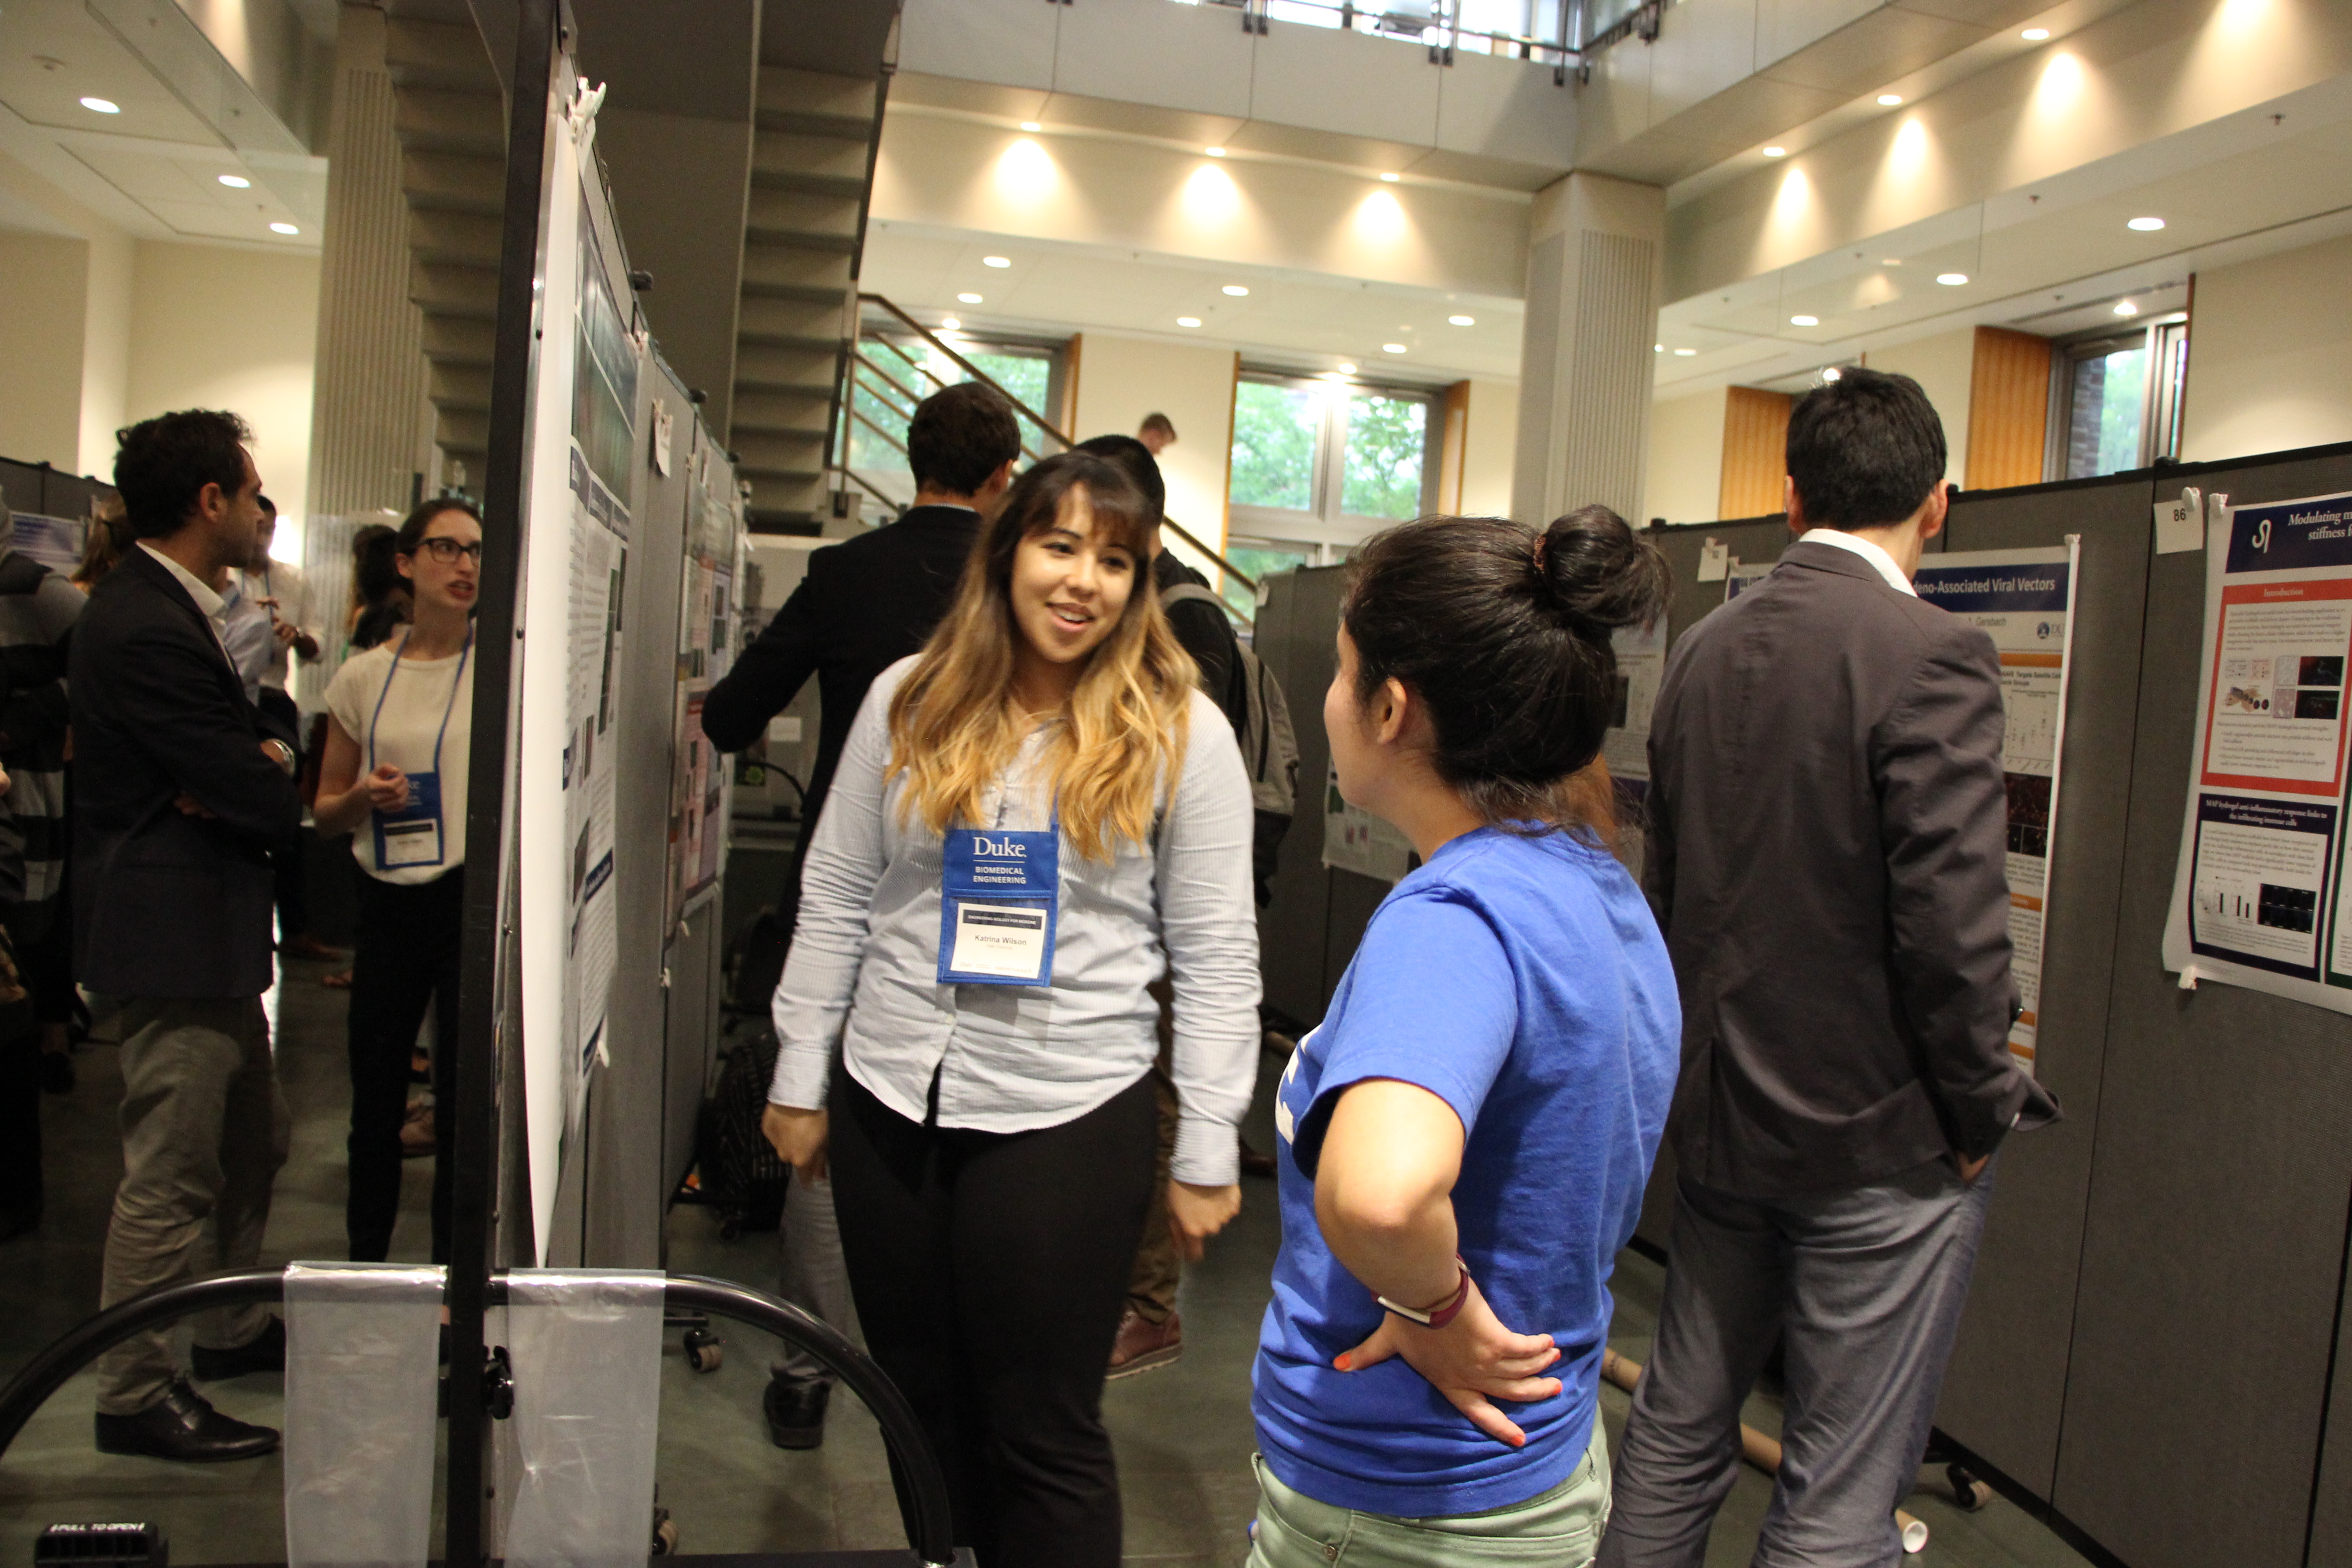 Researchers present their work during the poster sessions at the Engineering Biology for Medicine conference.